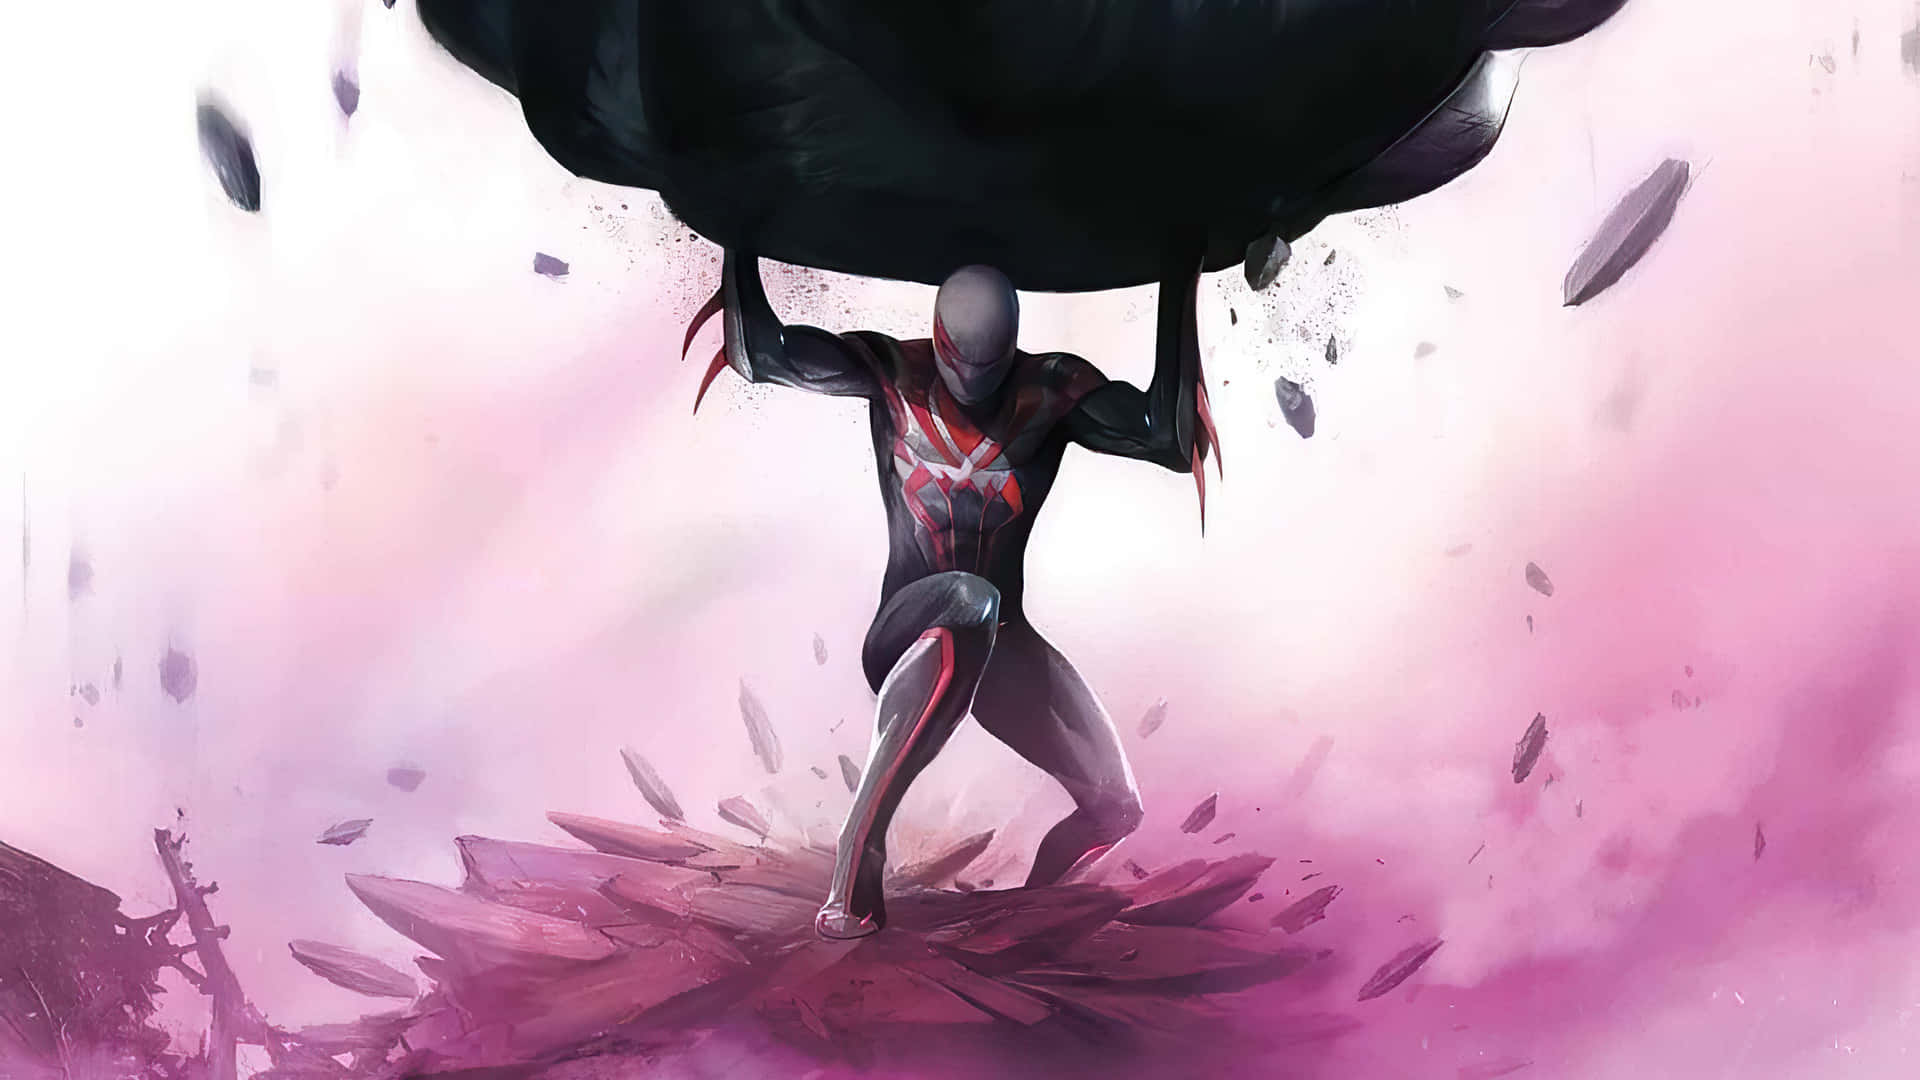 Spider-Man 2099 Leaping into Action Wallpaper